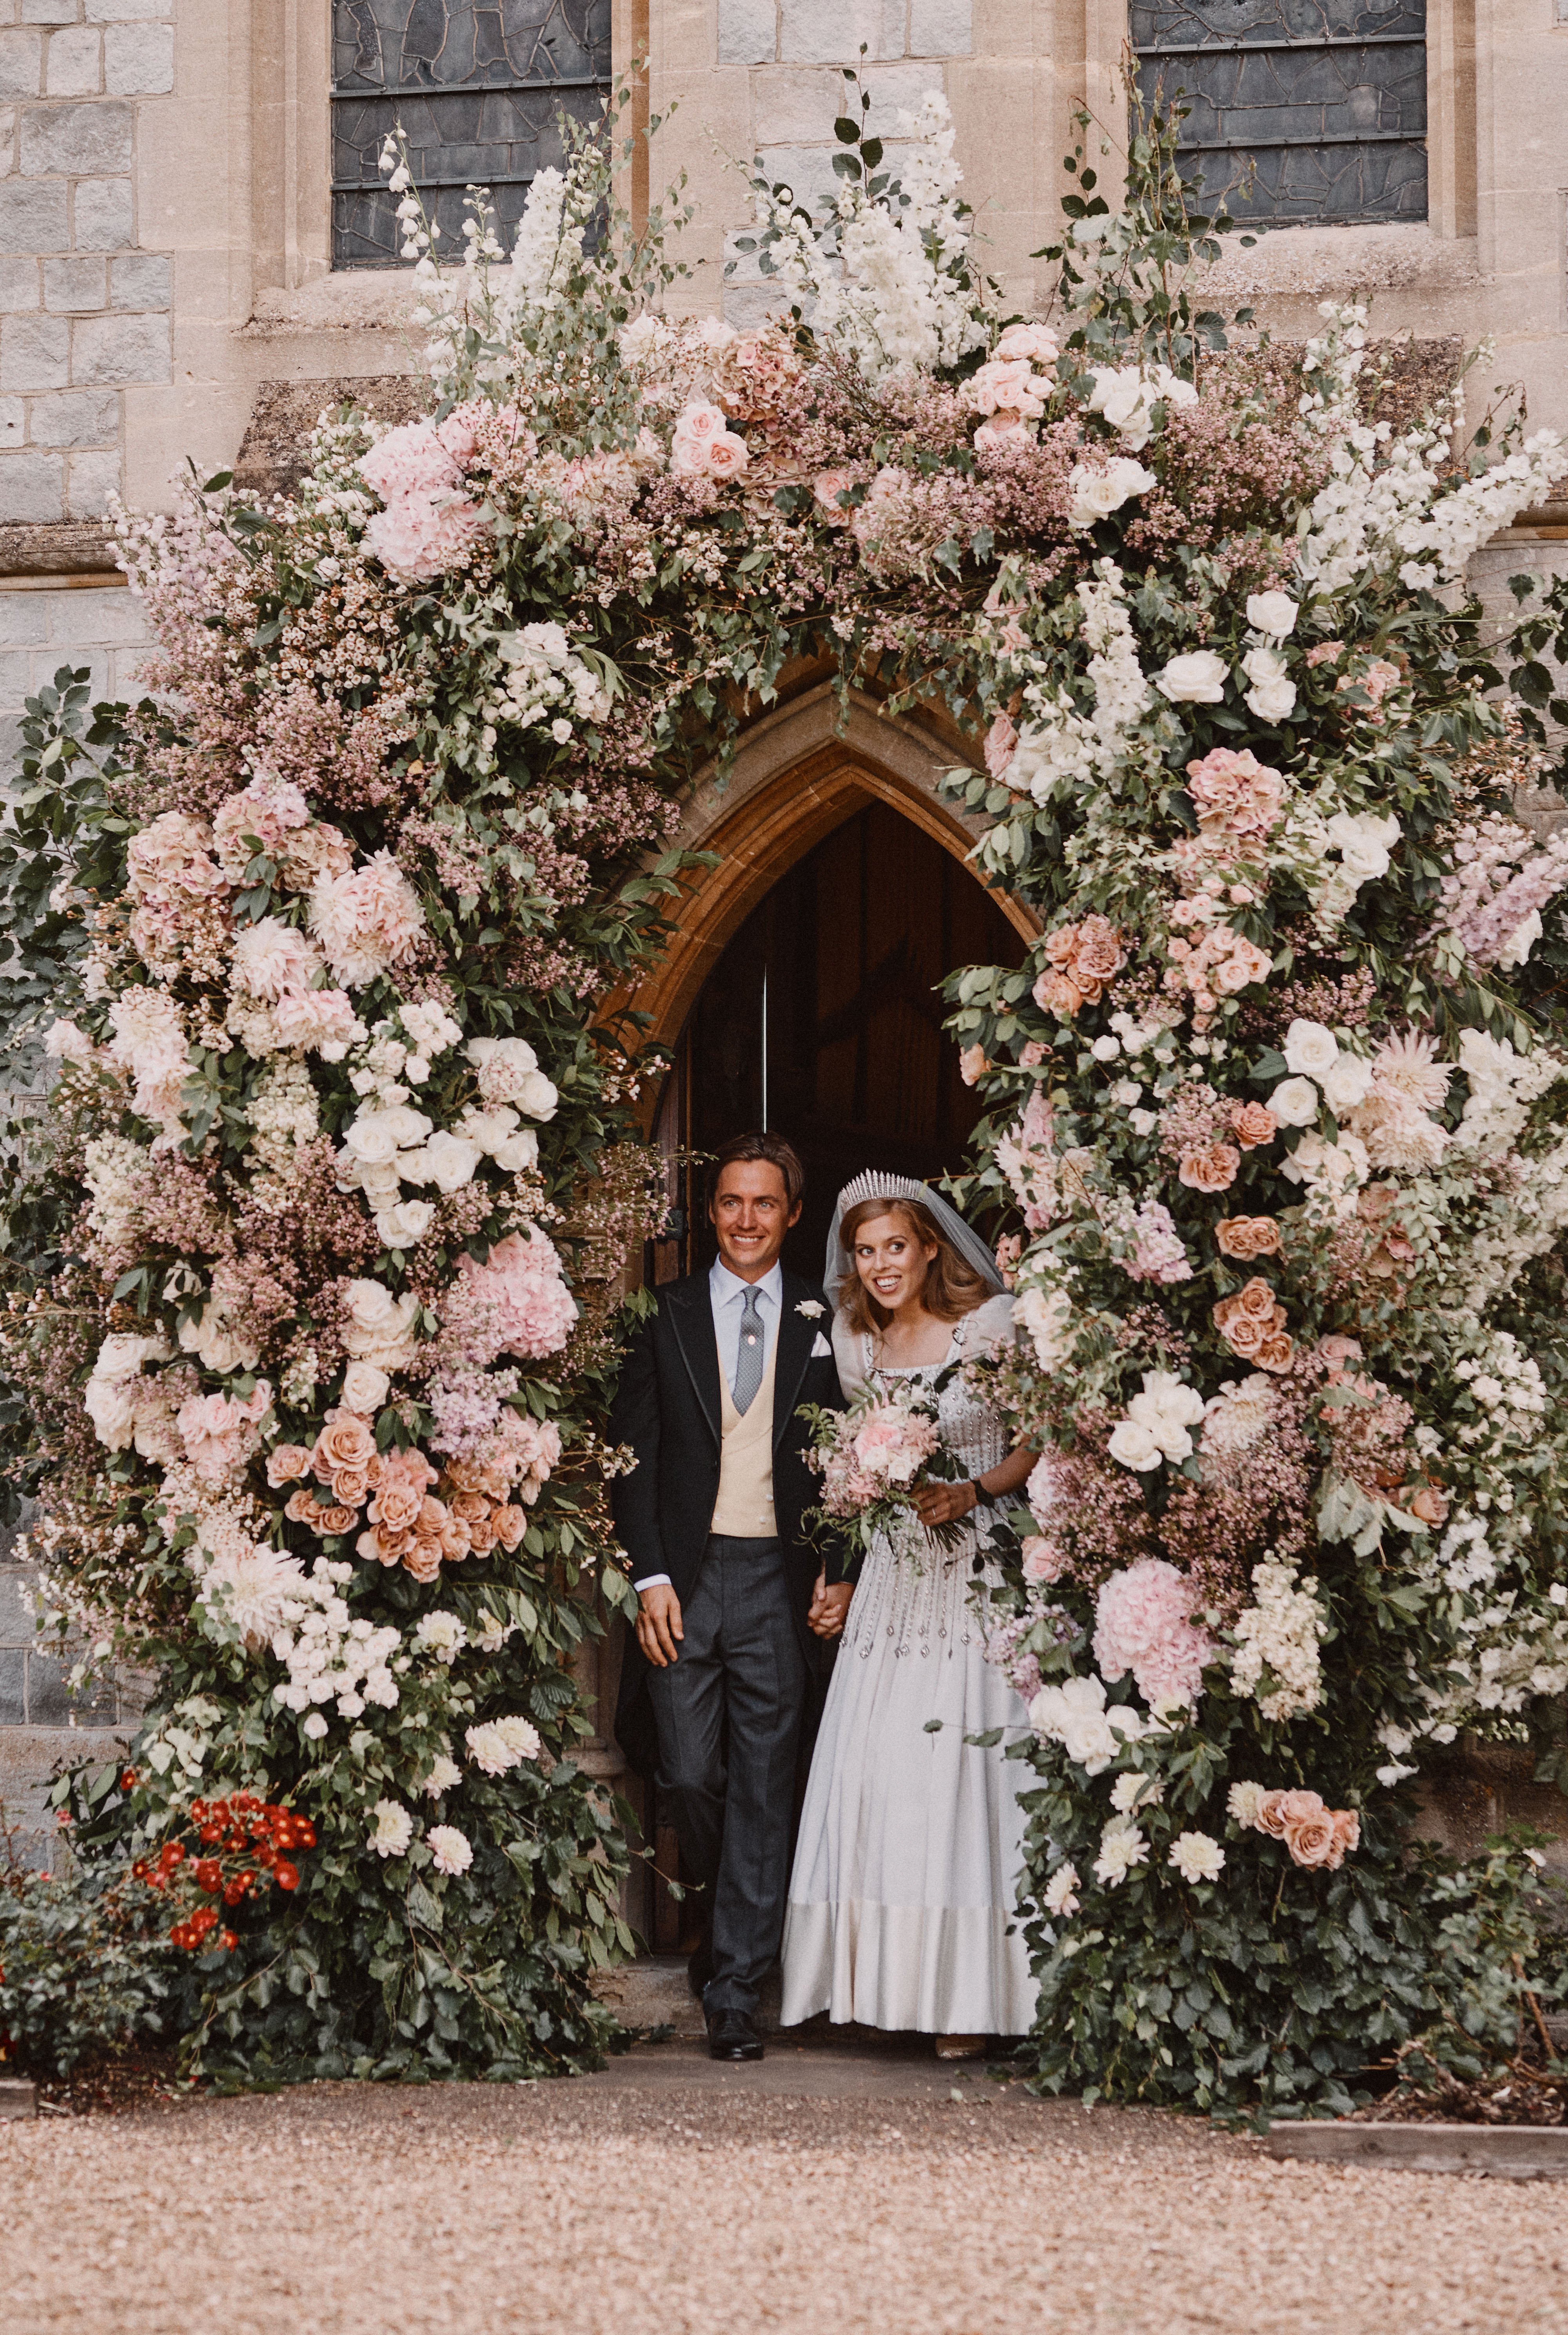 This official wedding photograph released by the Royal Communications of Princess Beatrice and Edoardo Mapelli Mozzi shows them leaving The Royal Chapel of All Saints at Royal Lodge, Windsor after their wedding on July 17th 2020 in Windsor, England. Issue date: Saturday July 18, 2020. | Source: Photo by Benjamin Wheeler - WPA Pool/Getty Images